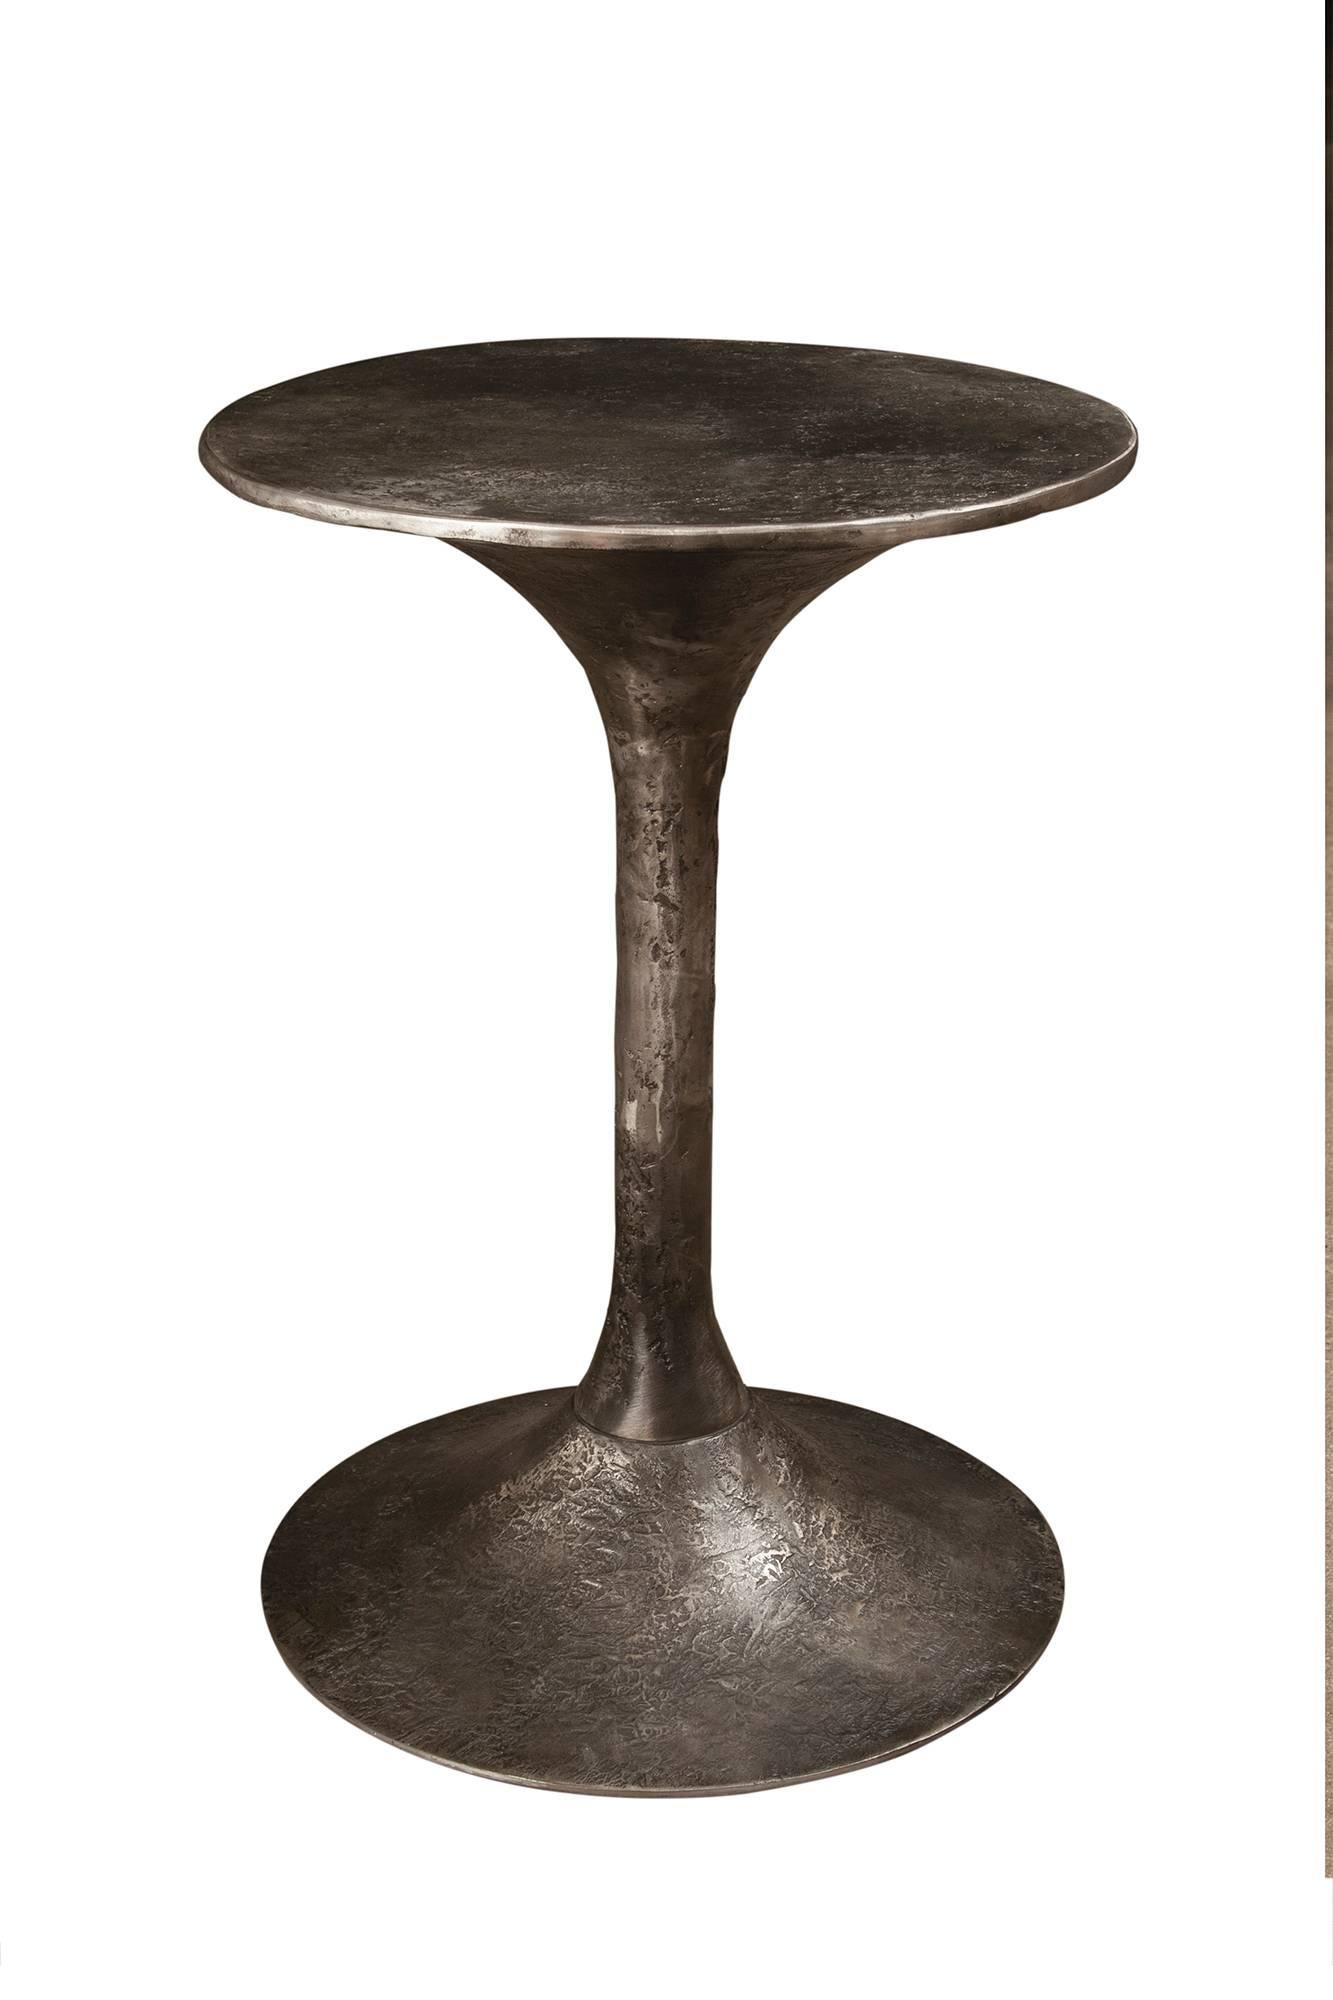 Side tables with an Industrial look made of cast aluminium.